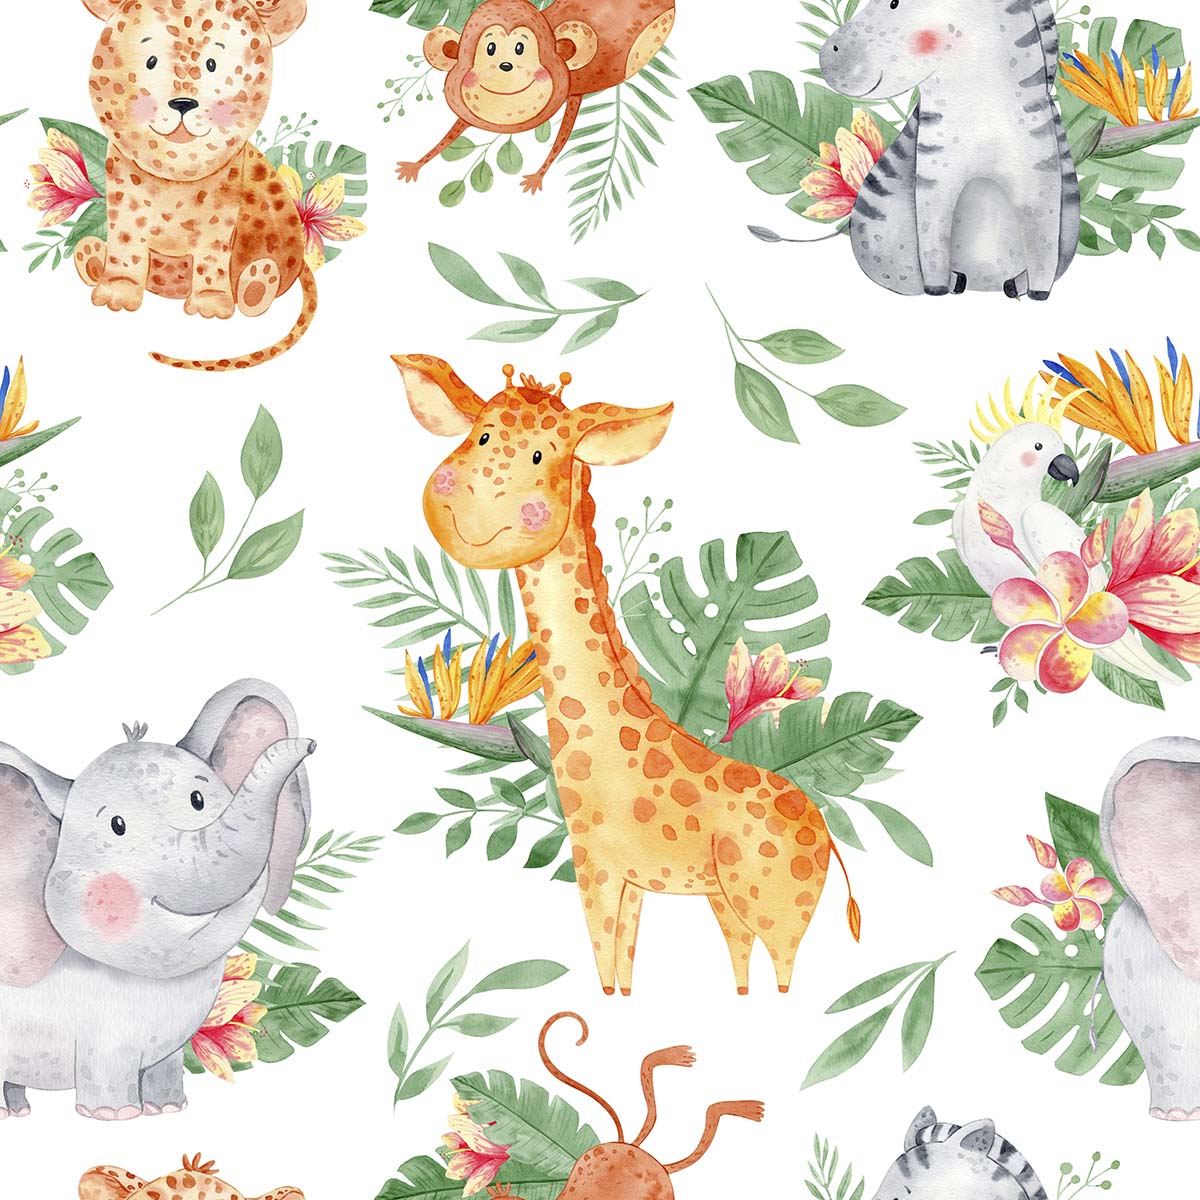 A pattern of animals and leaves